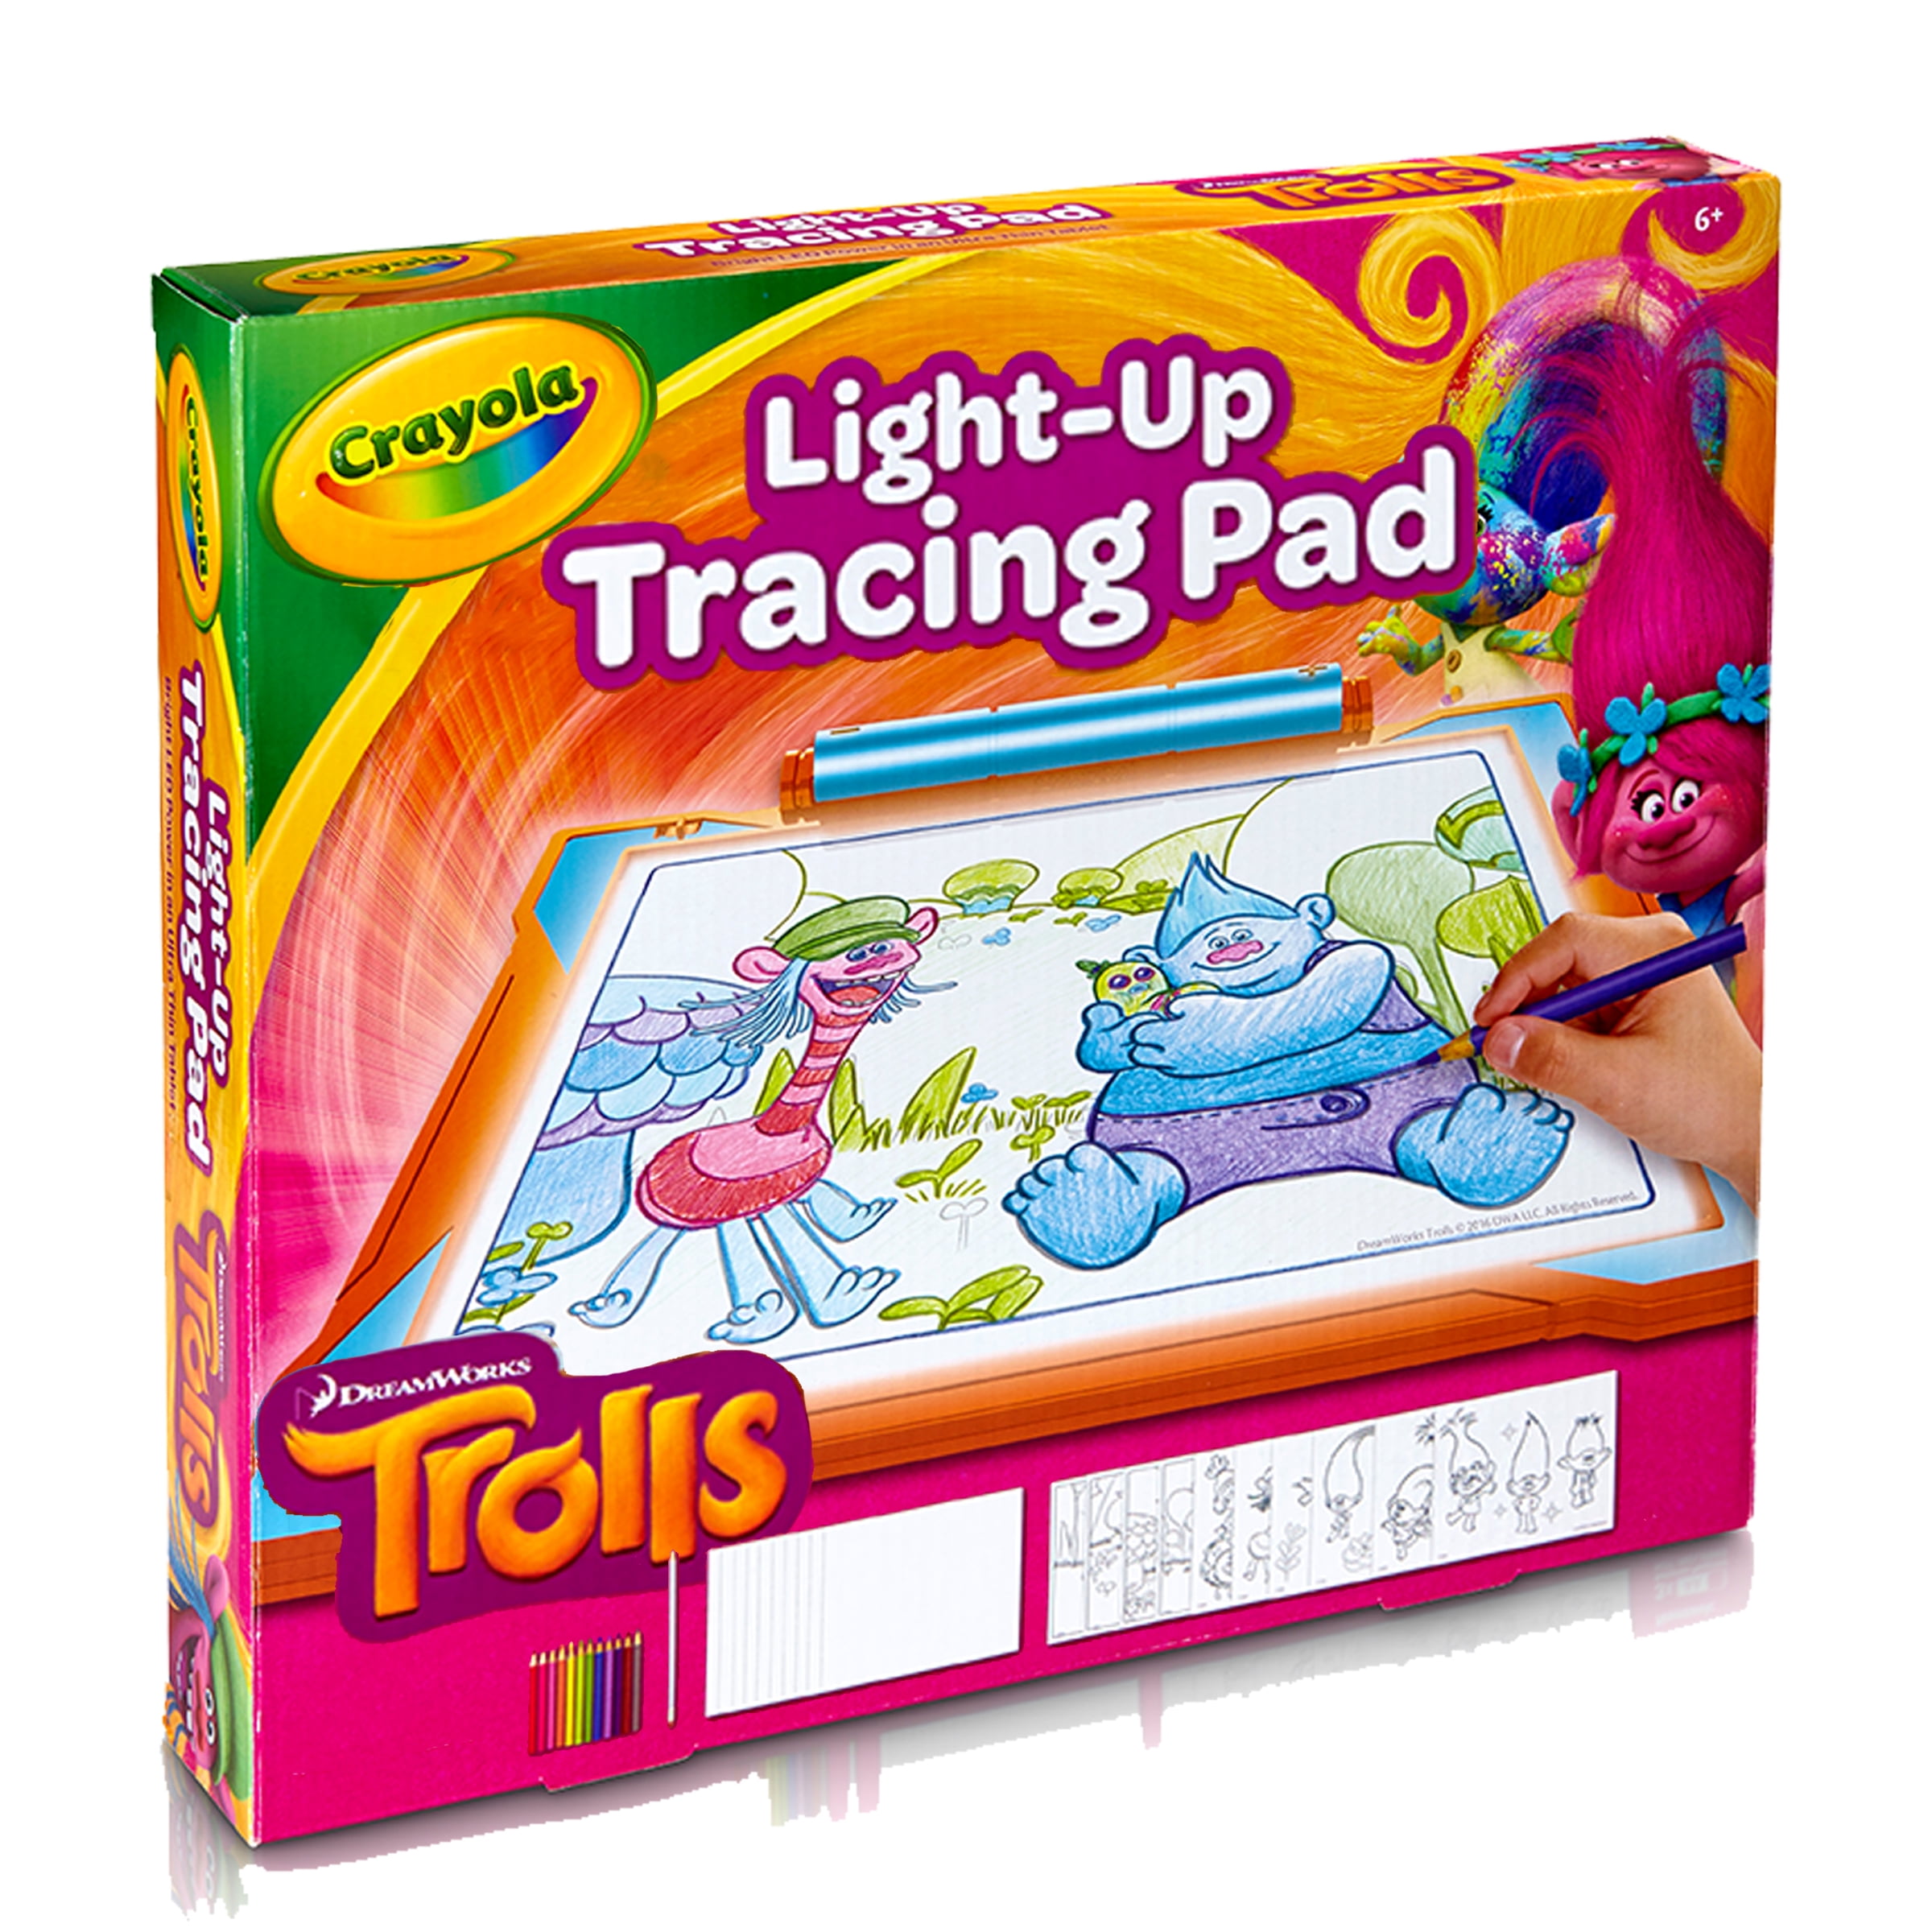 Crayola Light Up Tracing Pad PINK BRIGHT LED POWER in an Ultra Thin Tablet